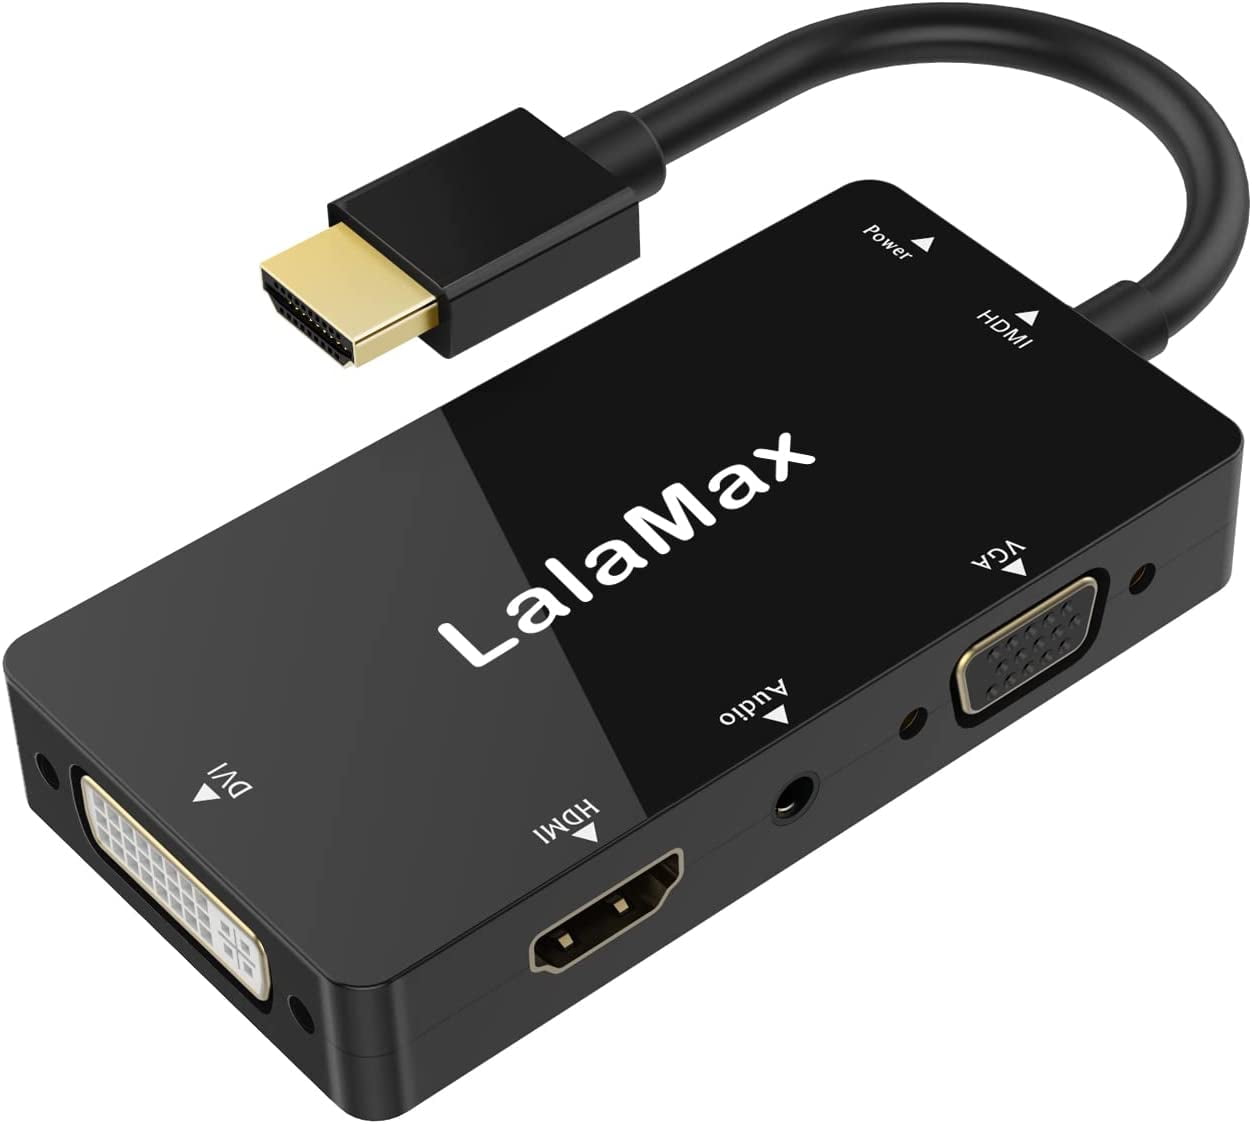 En nat Latter Krigsfanger LalaMax HDMI to VGA DVI HDMI with Audio Adapter Multiport 4-in-1 Converter  Splitter dongle 3.5mm Jack for Portable Devices(Black) - Walmart.com